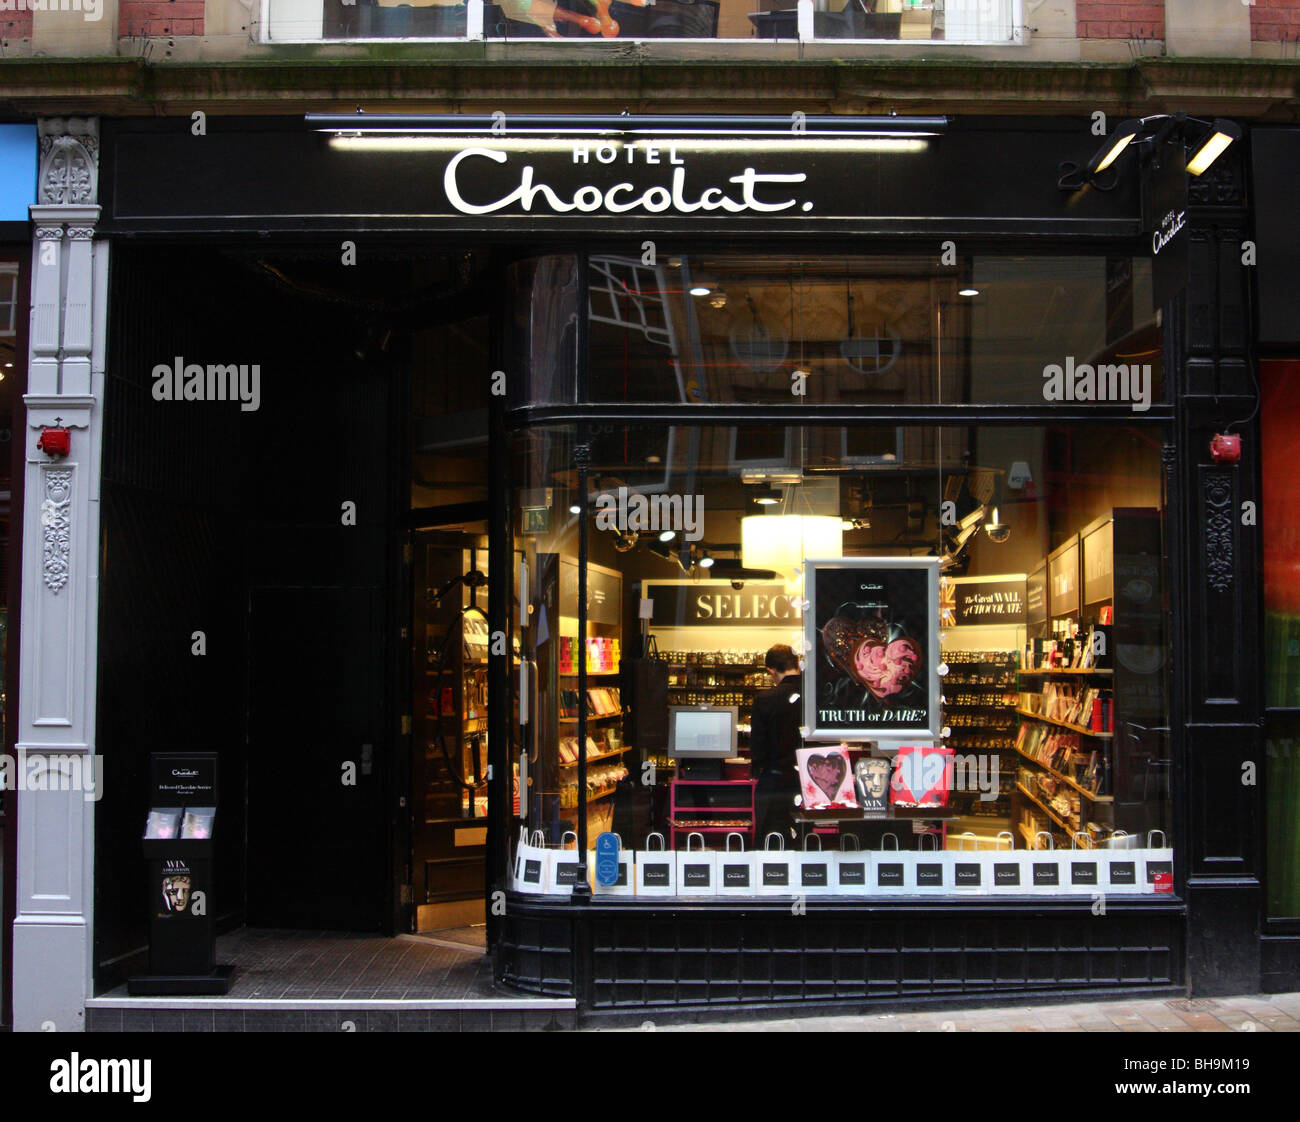 Hotel Chocolat retail outlet in Leeds, England, Regno Unito Foto Stock